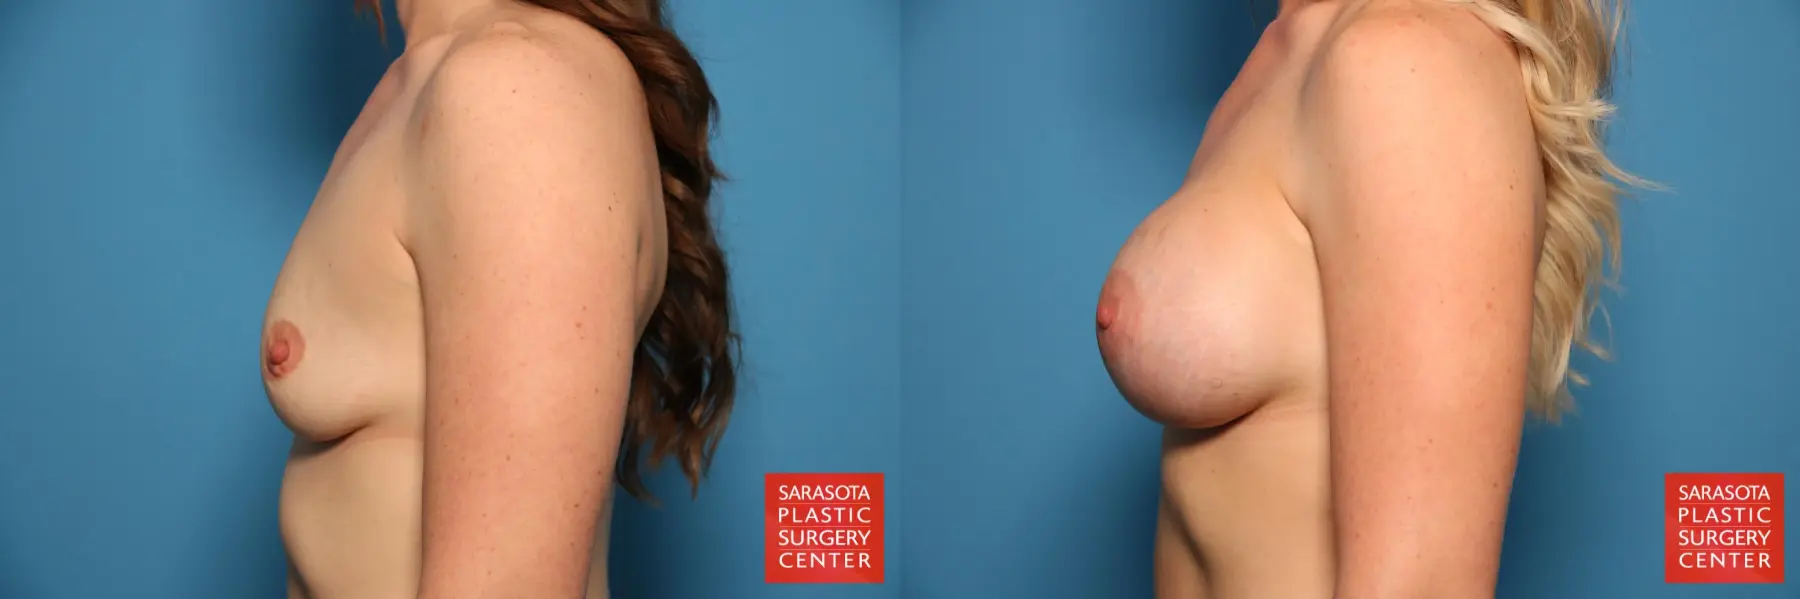 Breast Augmentation: Patient 9 - Before and After 3